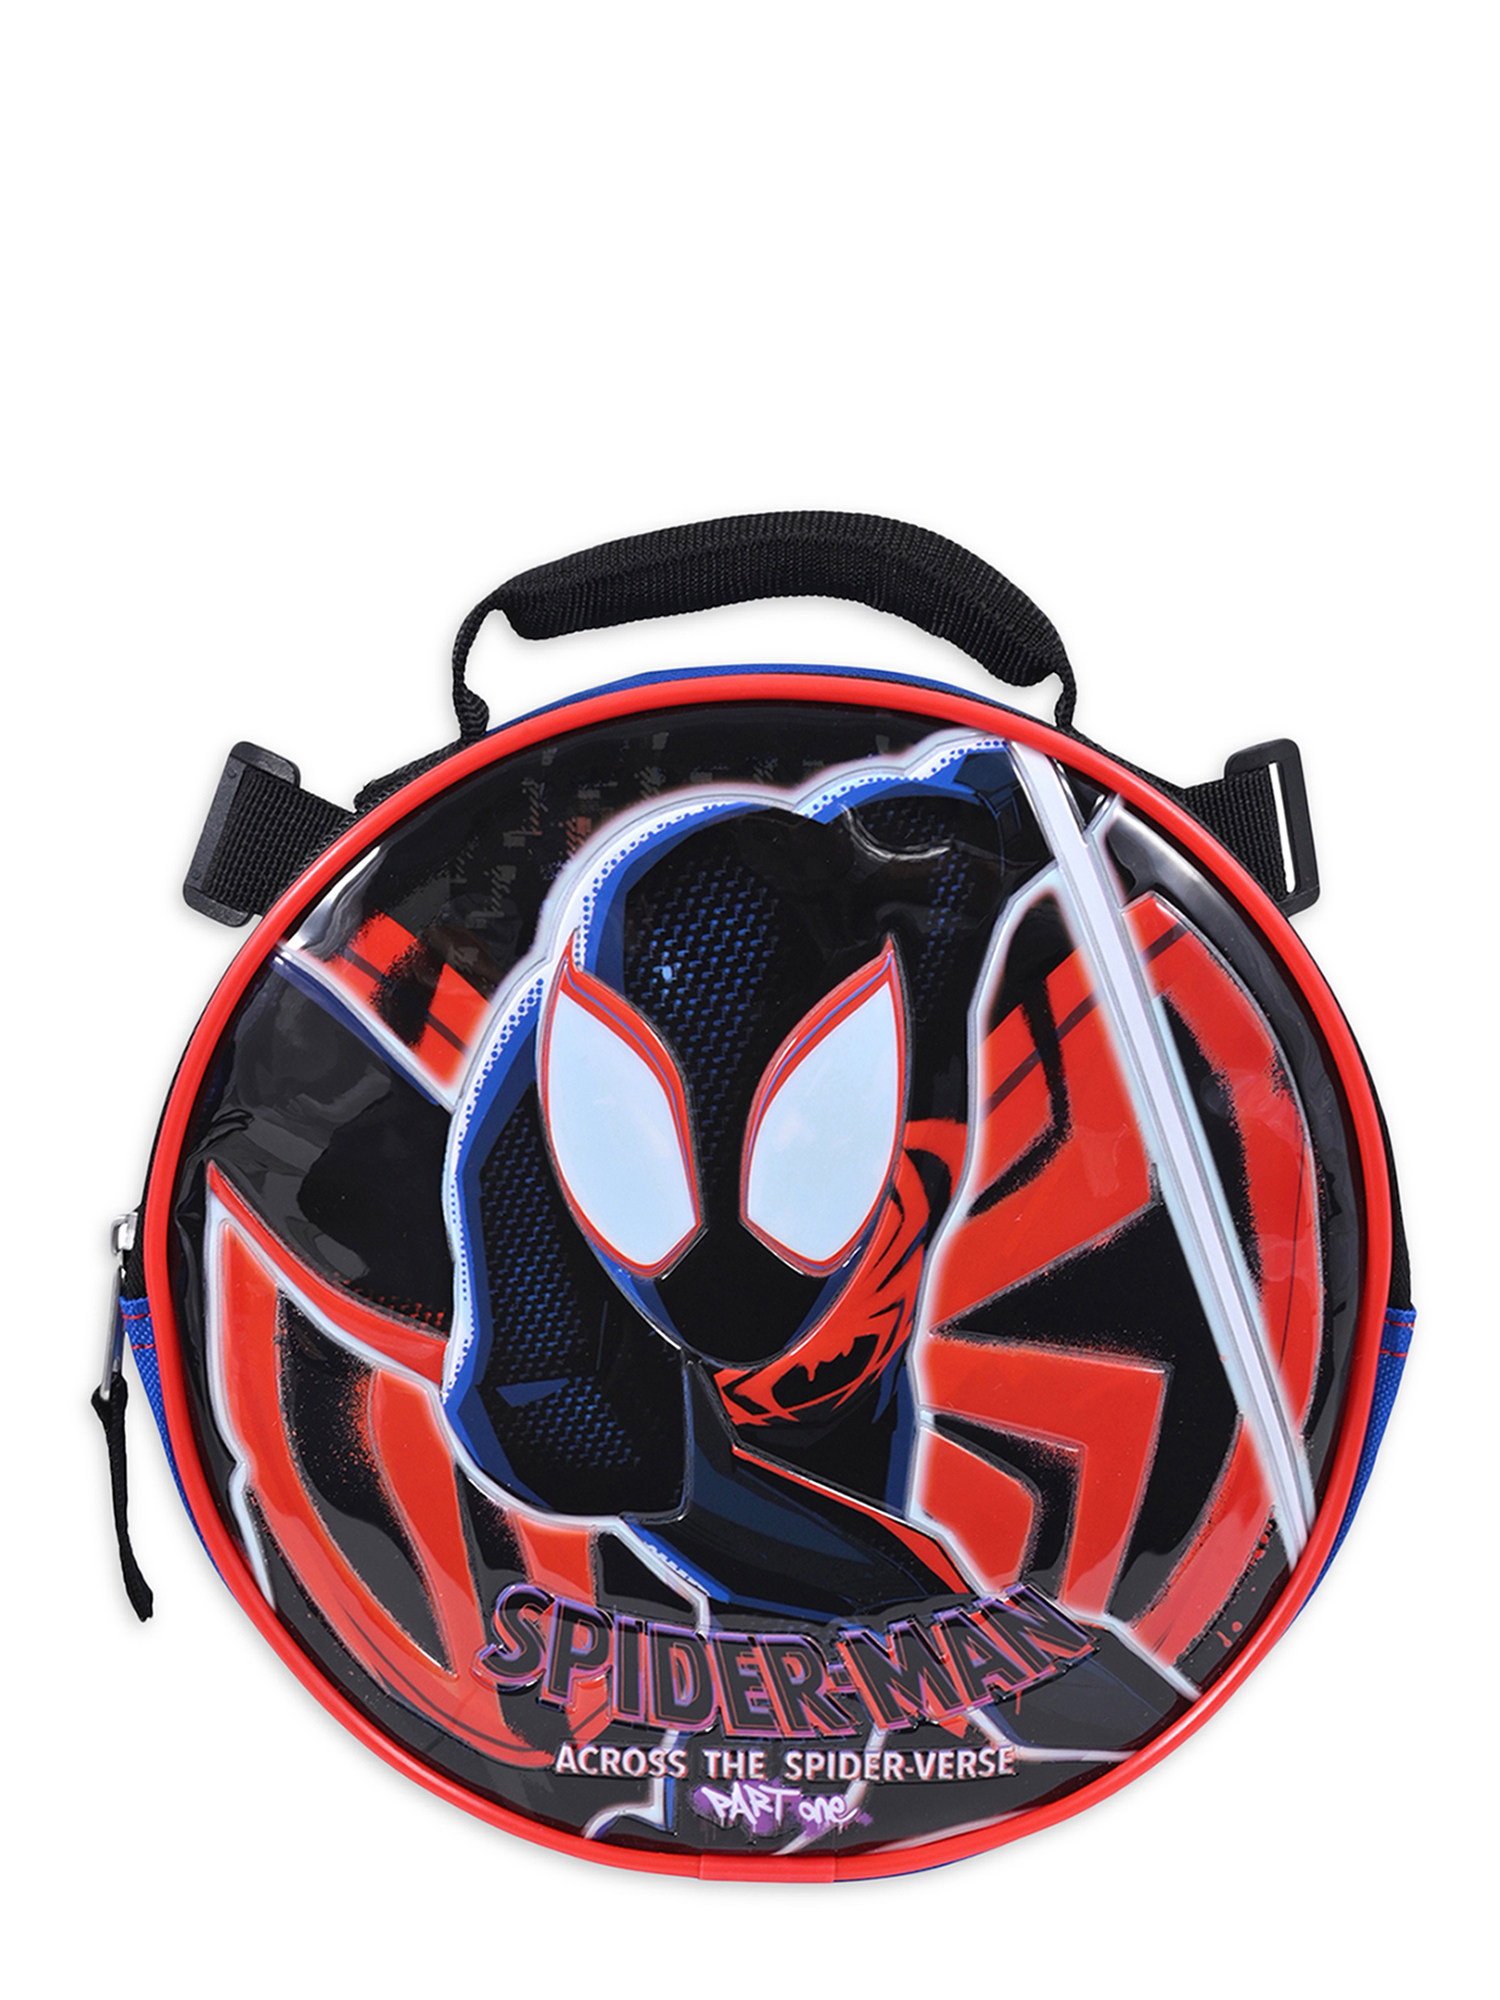 Marvel Spider-Man Across the Spider-Verse Boys 17" Laptop Backpack 2-Piece Set with Lunch Bag, Black Blue - image 4 of 9